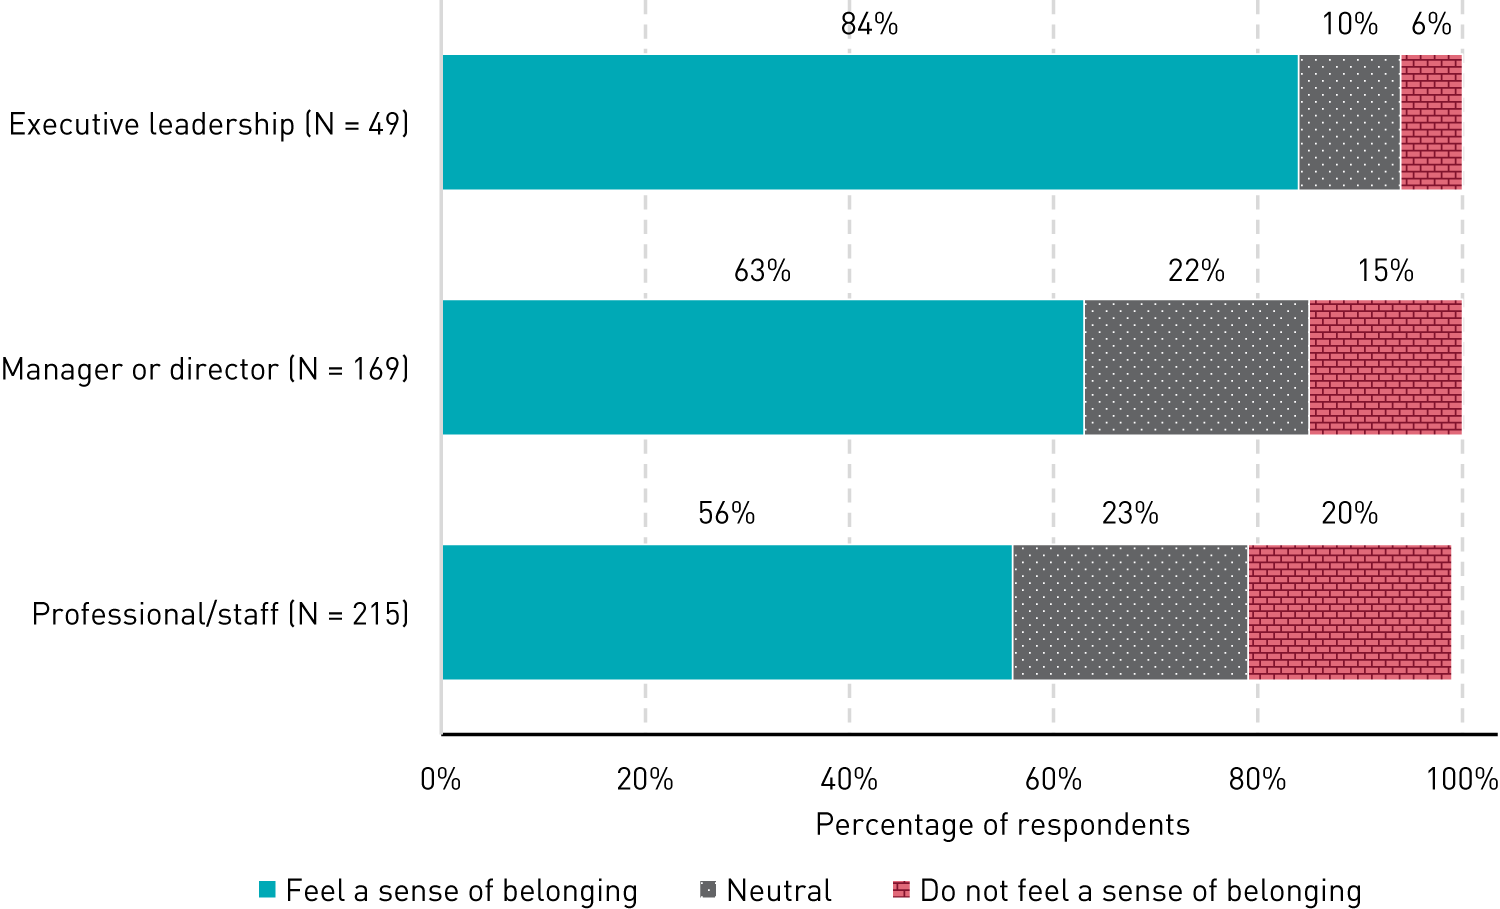 Stacked bar chart showing sense of belonging by job role. Among those in executive leadership positions, 84% feel a sense of belonging, 6% do not, and 10% are neutral. Among those in manager or director positions, 63% feel a sense of belonging, 15% do not, and 22% are neutral. Among those in professional or staff positions, 56% feel a sense of belonging, 20% do not, and 23% are neutral.